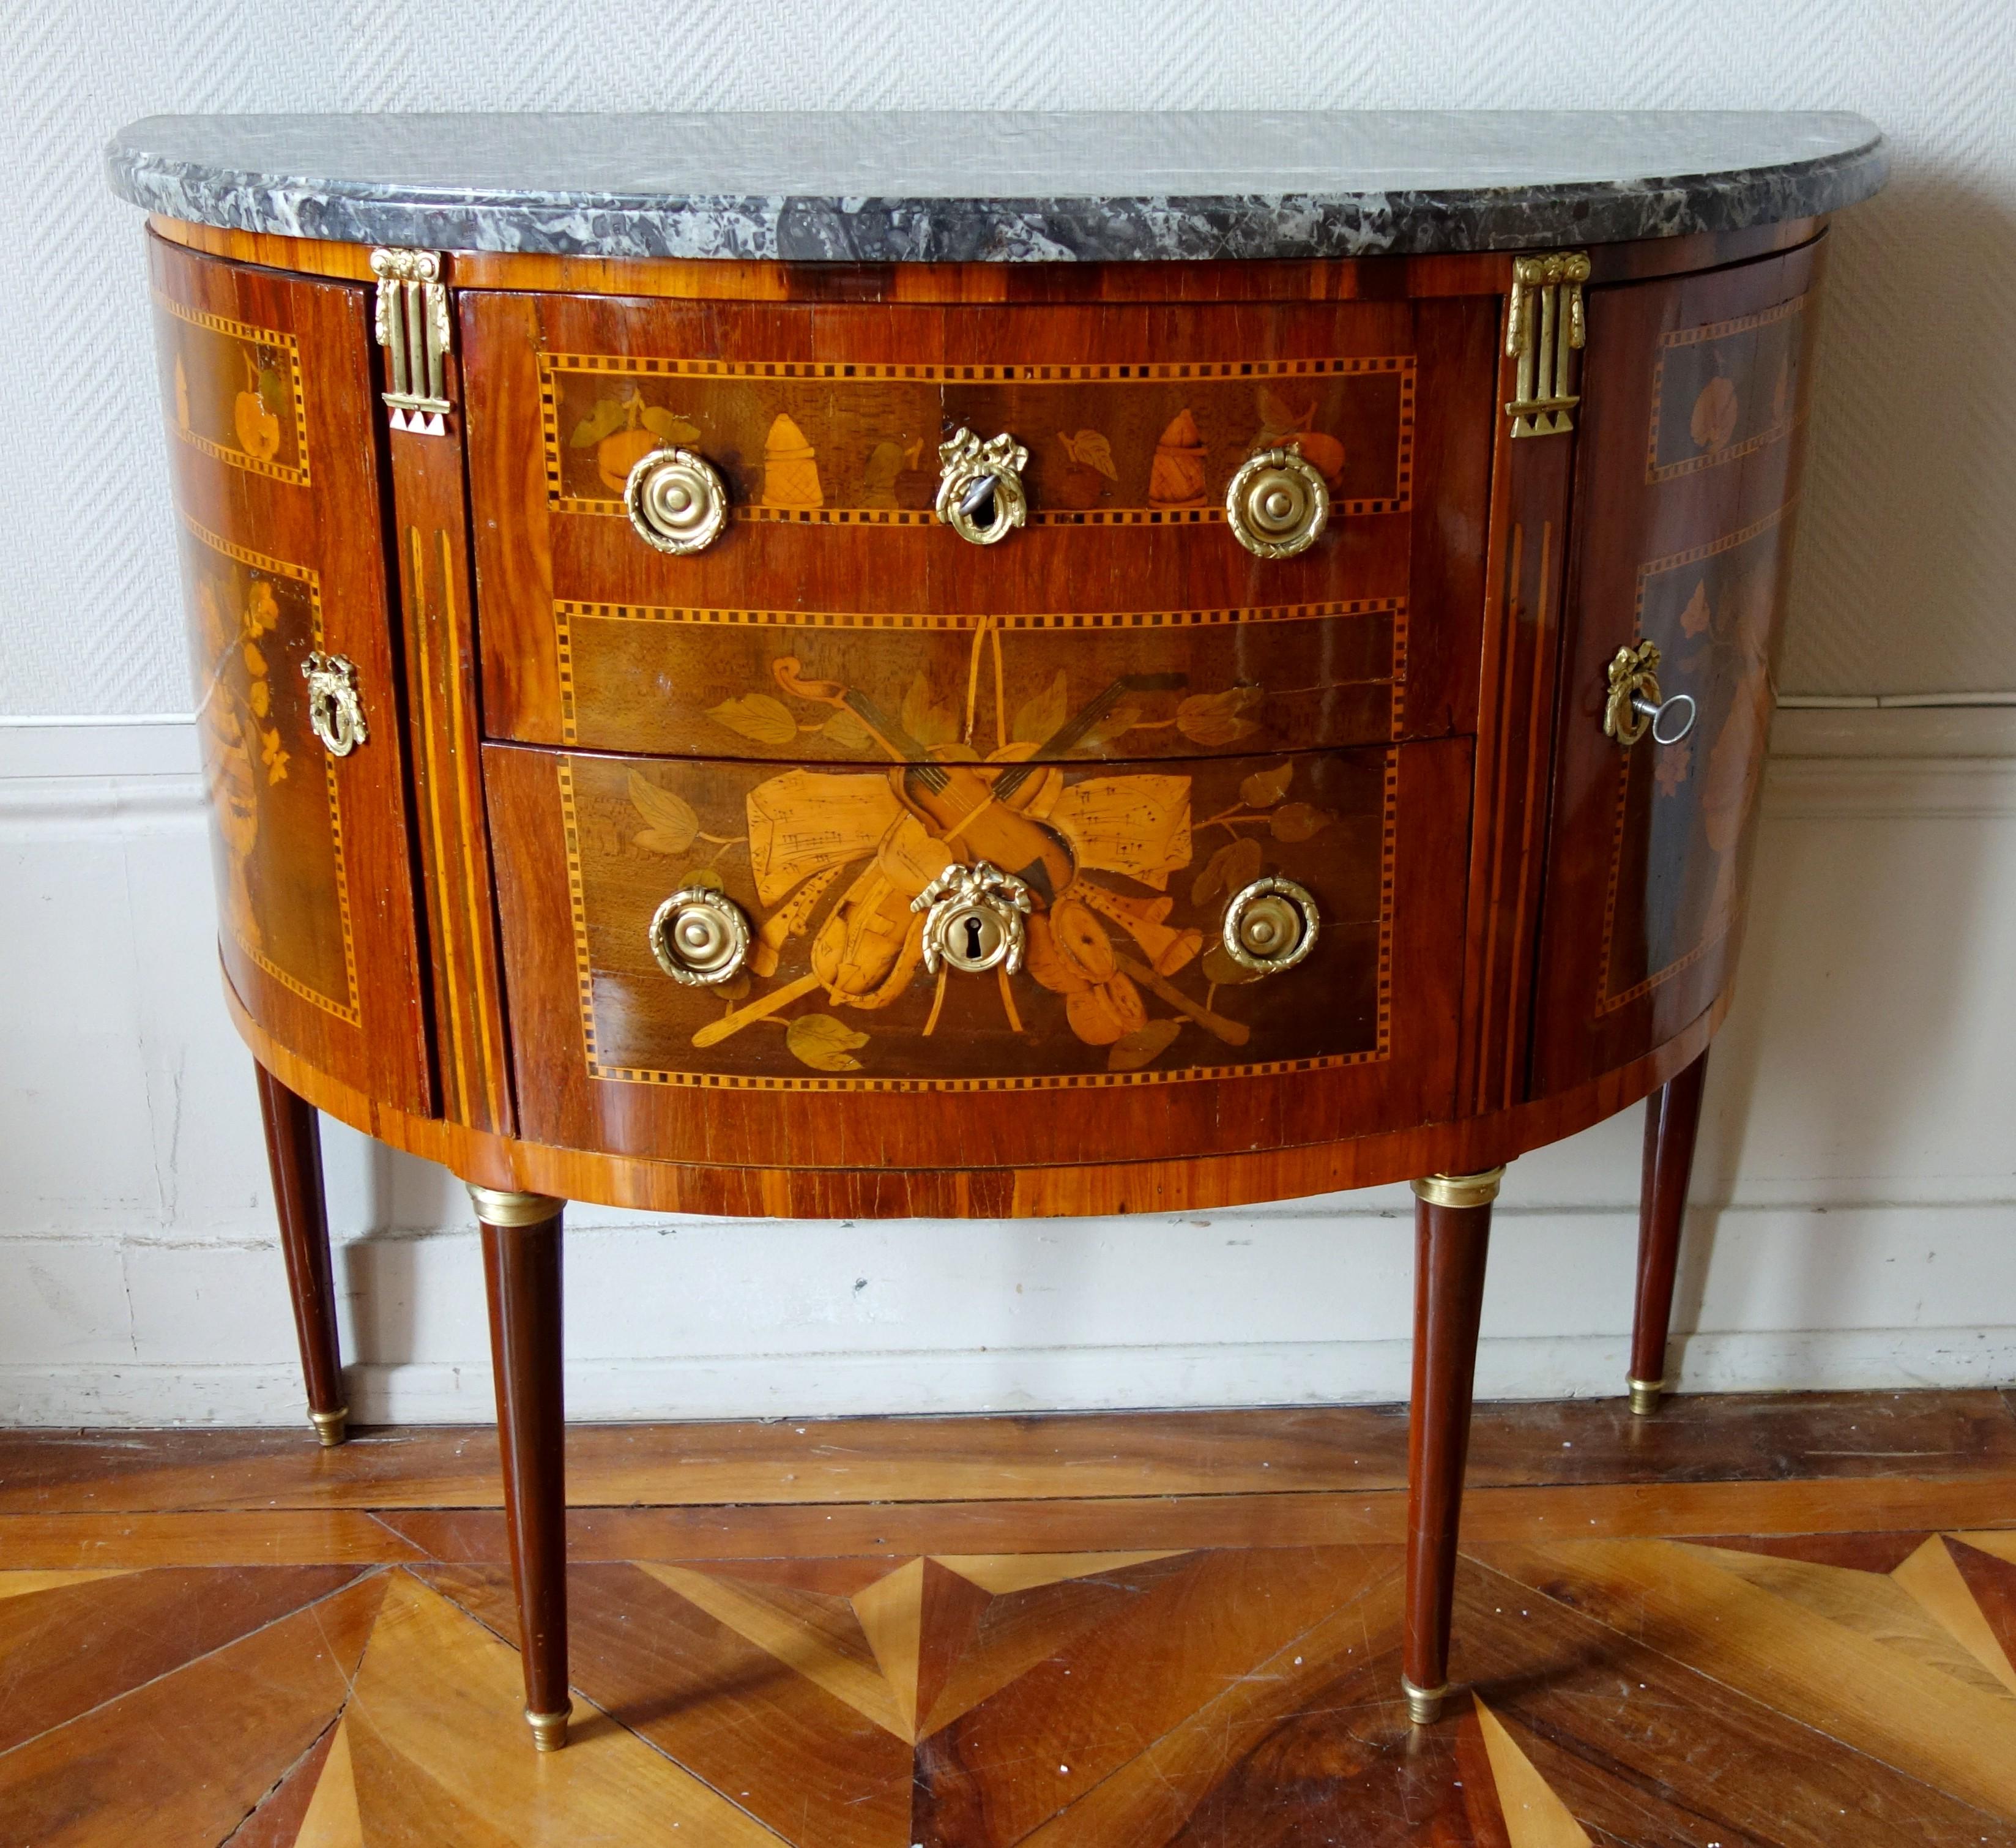 Antique French Louis XVI half-moon-shaped marquetry commode / chest of drawers.

18th century luxurious production : beautiful marquetry model with musical trophies, vases of flowers, fruits, everyday accessories (tea box ...) patterns on the